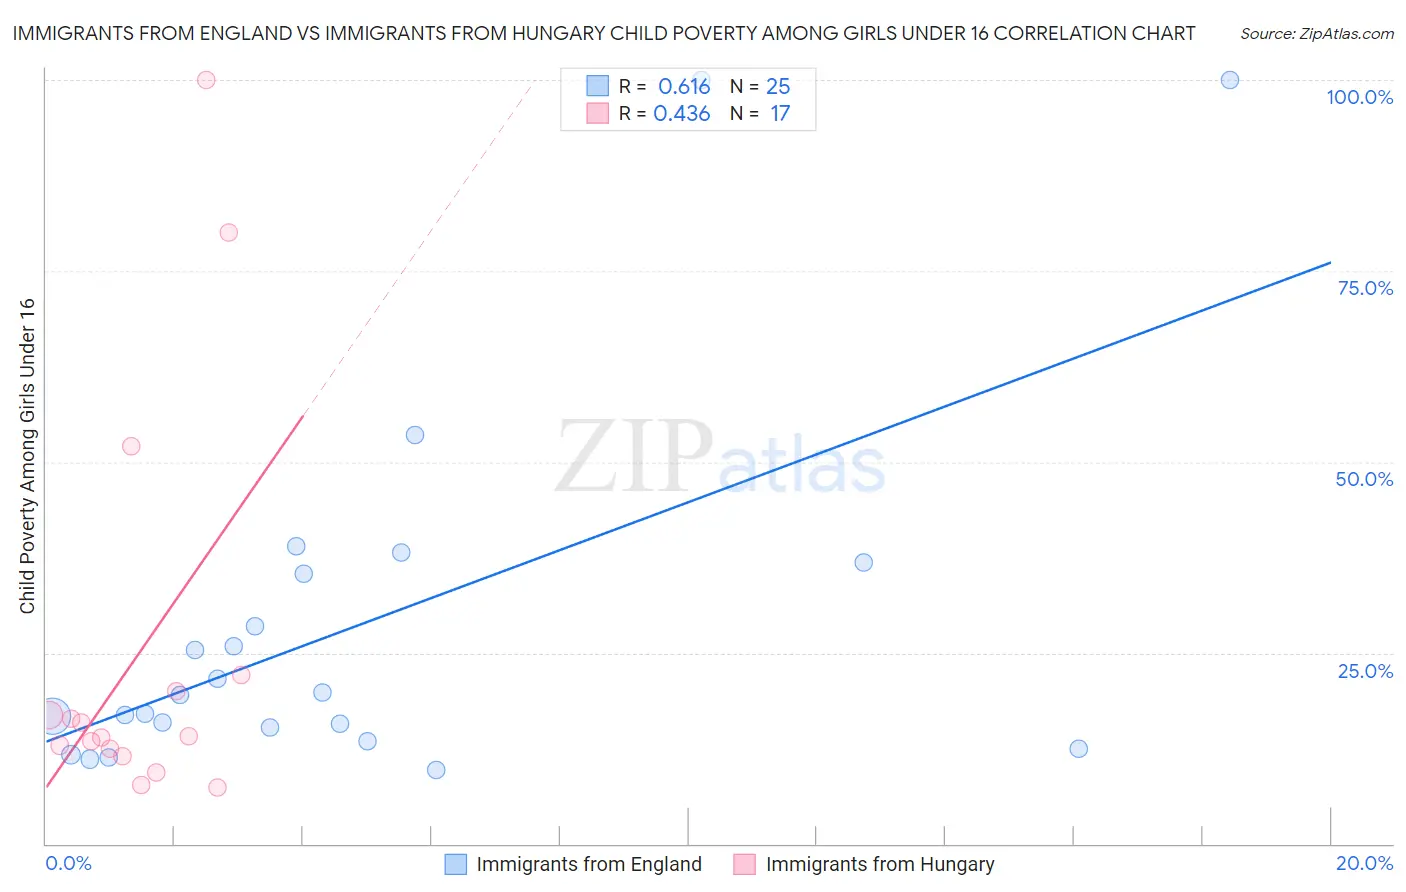 Immigrants from England vs Immigrants from Hungary Child Poverty Among Girls Under 16